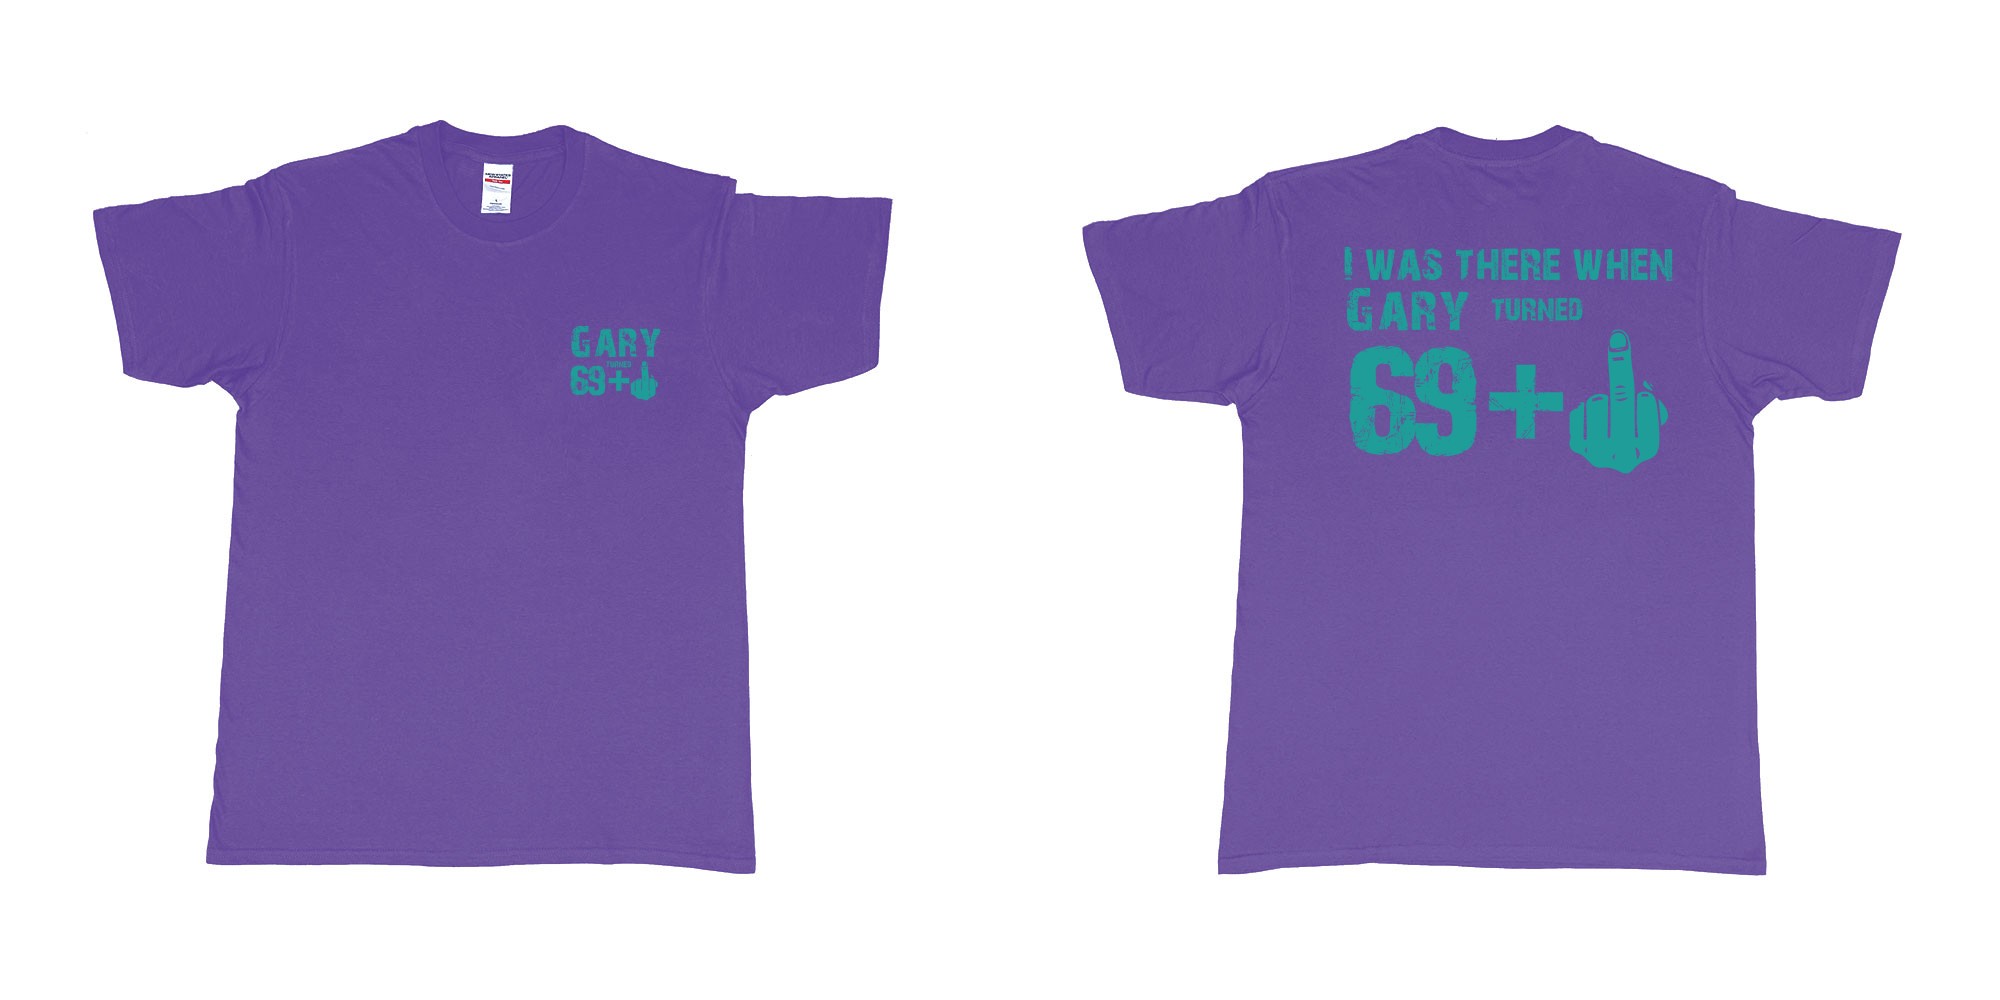 Custom tshirt design 69 plus 1 70th fuck you in fabric color purple choice your own text made in Bali by The Pirate Way